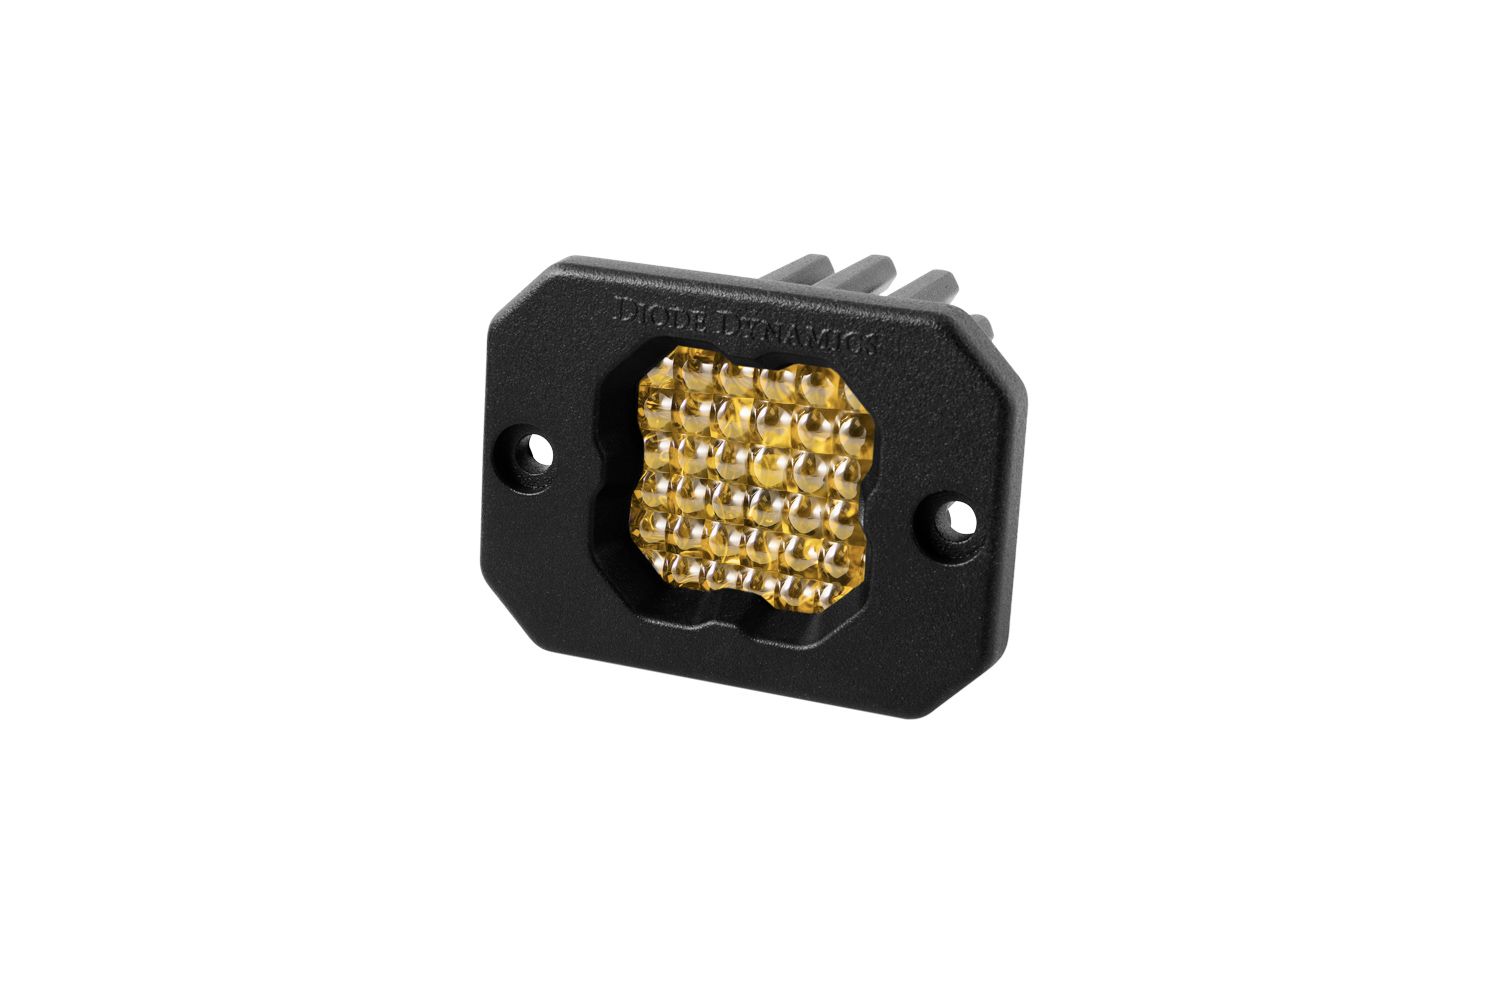 Stage Series C1 Yellow Sport Flush Mount LED Pod (one)